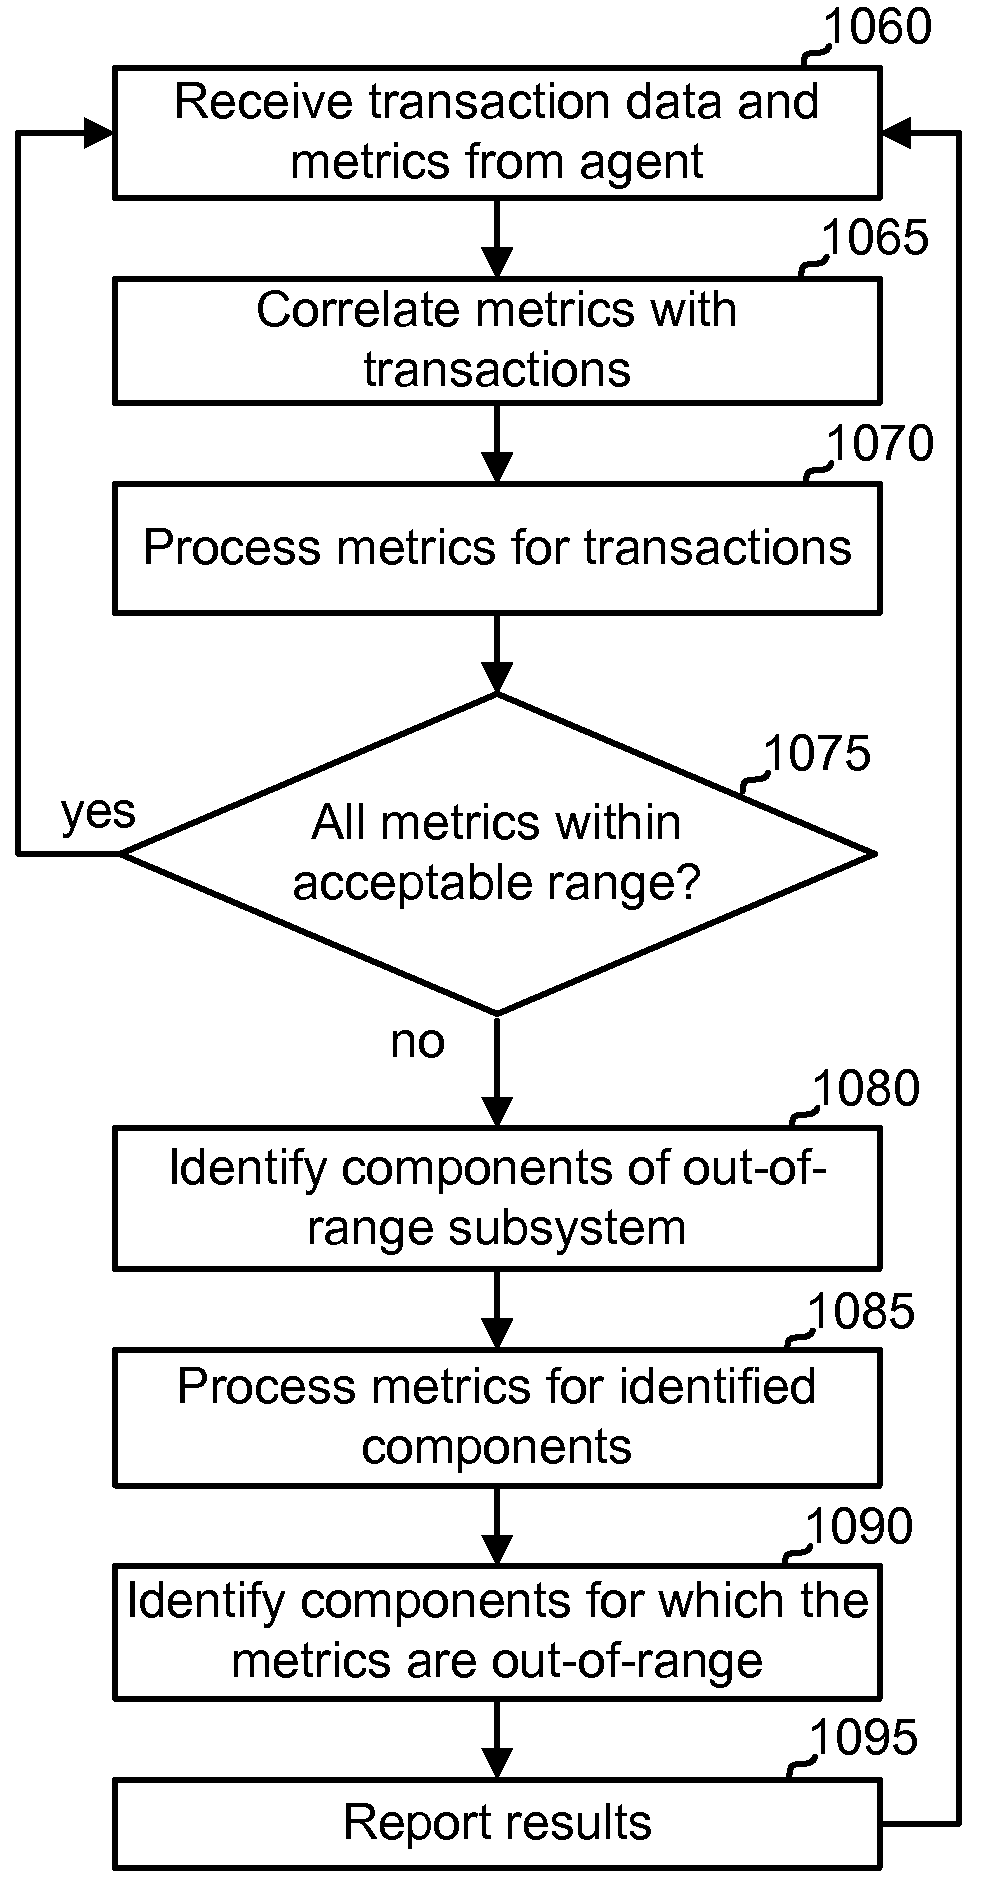 Automatic root cause analysis of performance problems using auto-baselining on aggregated performance metrics